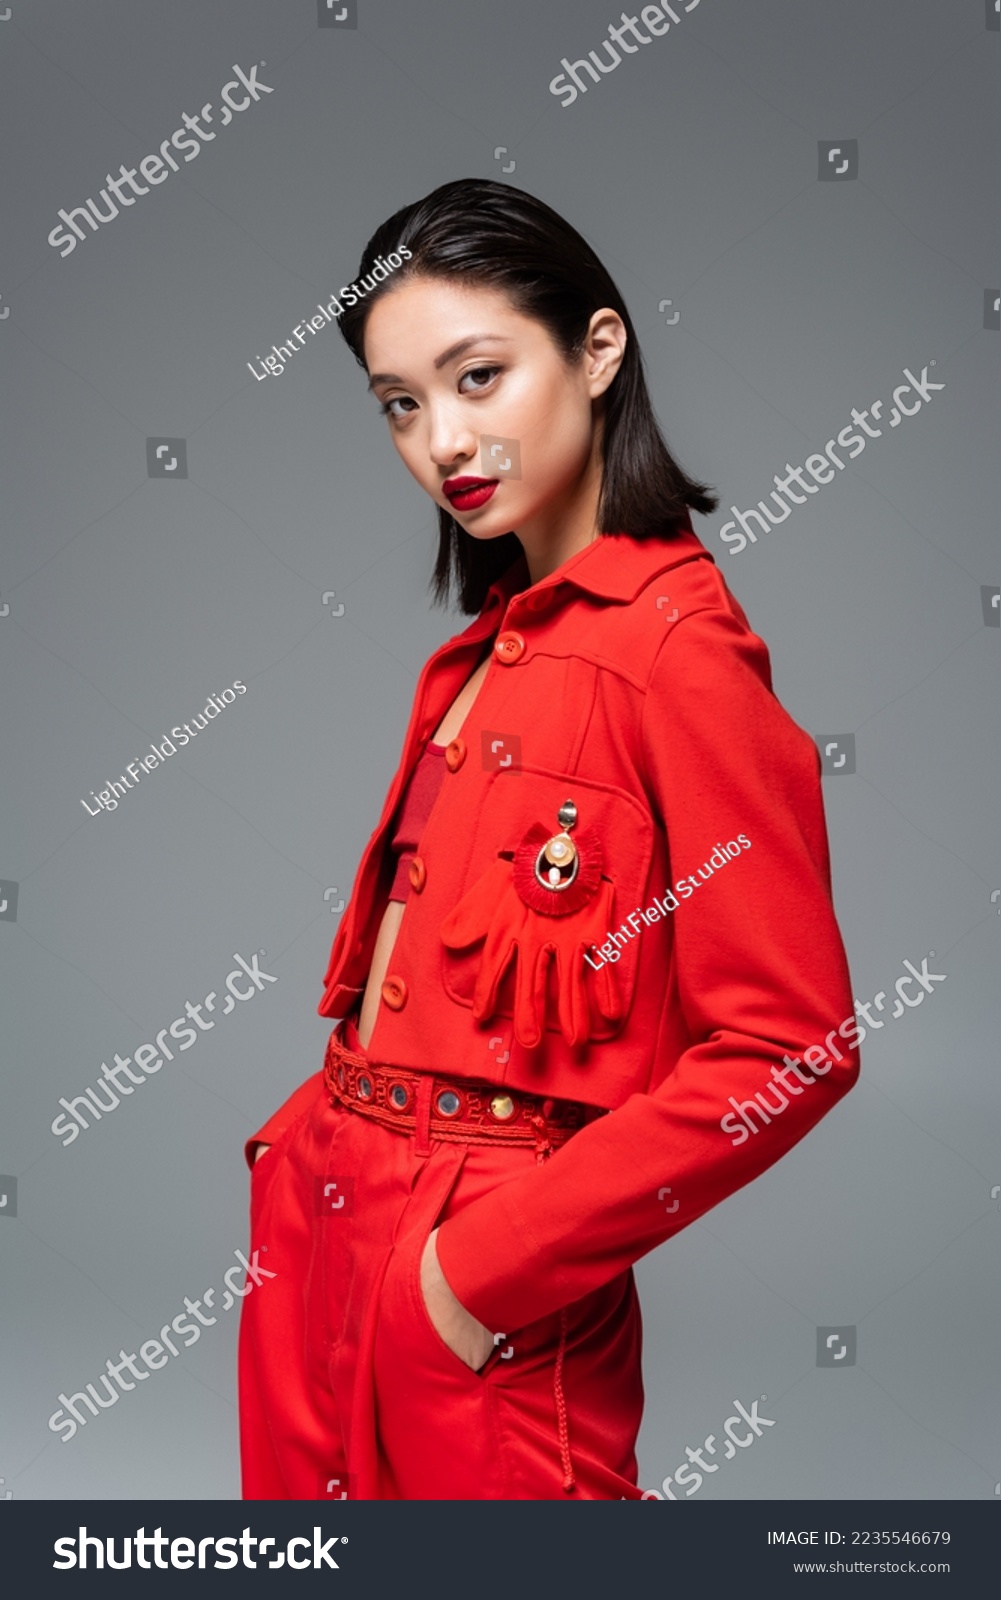 asian woman in red jacket decorated with brooch and glove standing with hands in pockets isolated on grey #2235546679